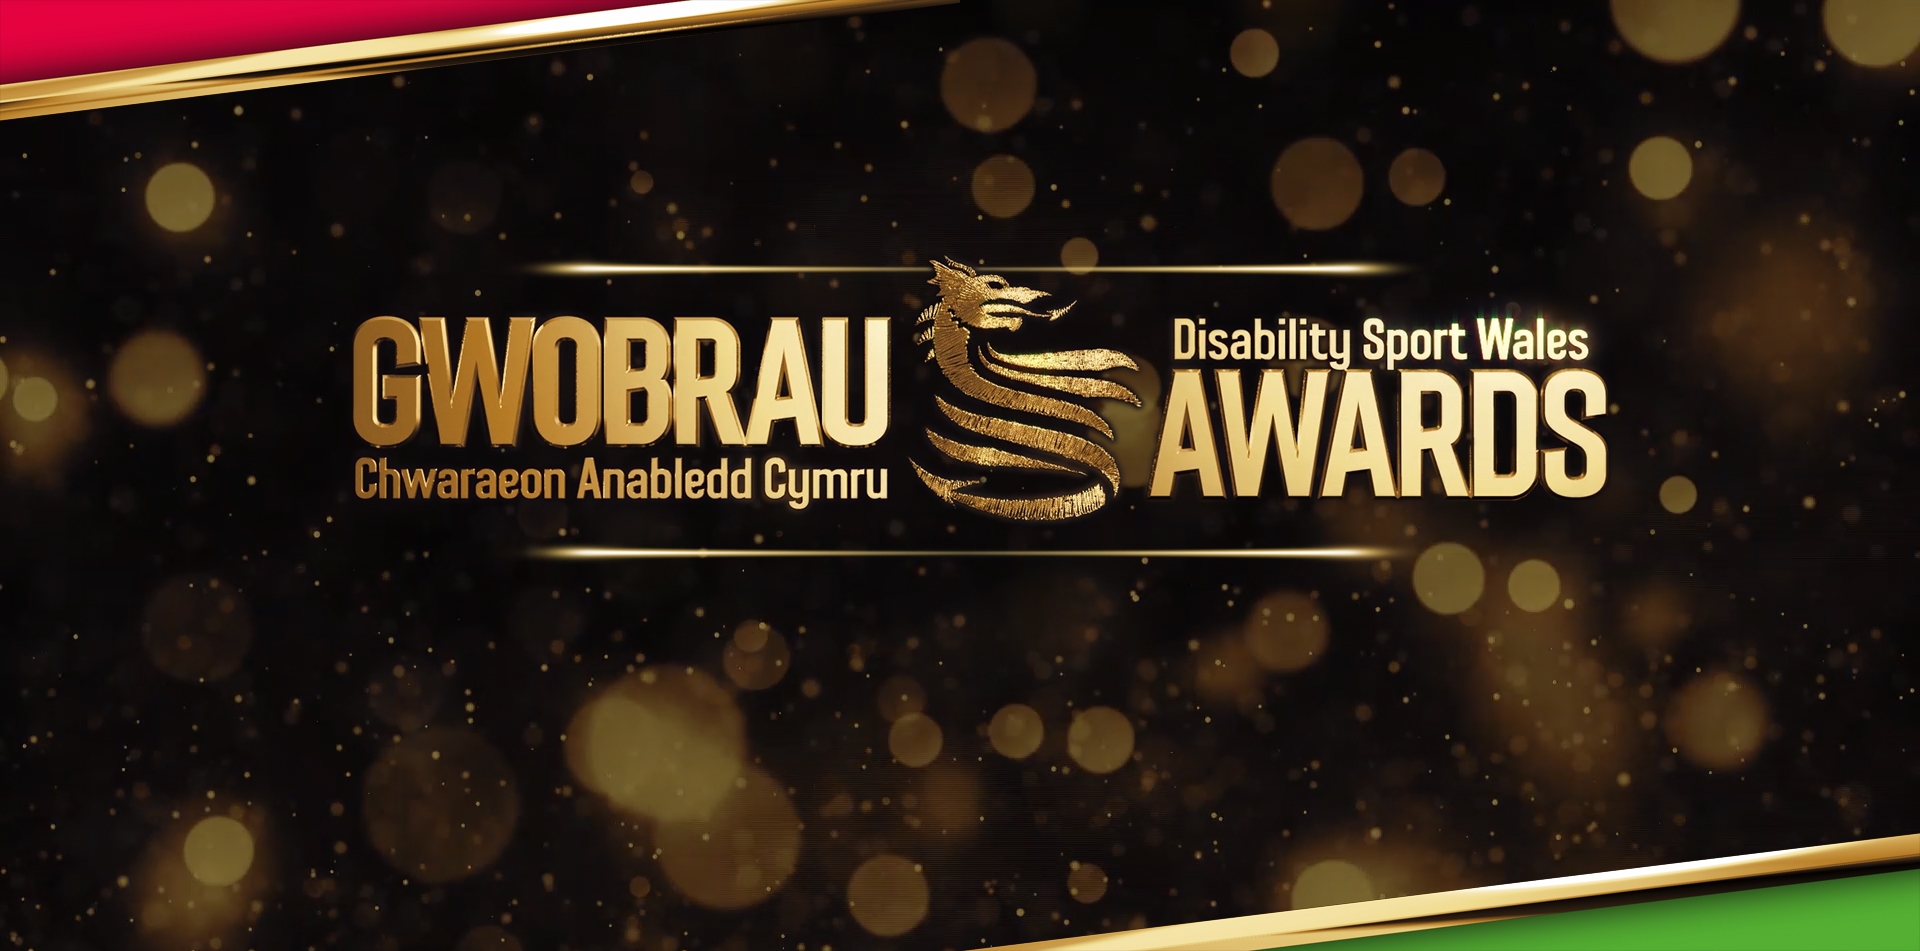 Disability Sport Wales Awards